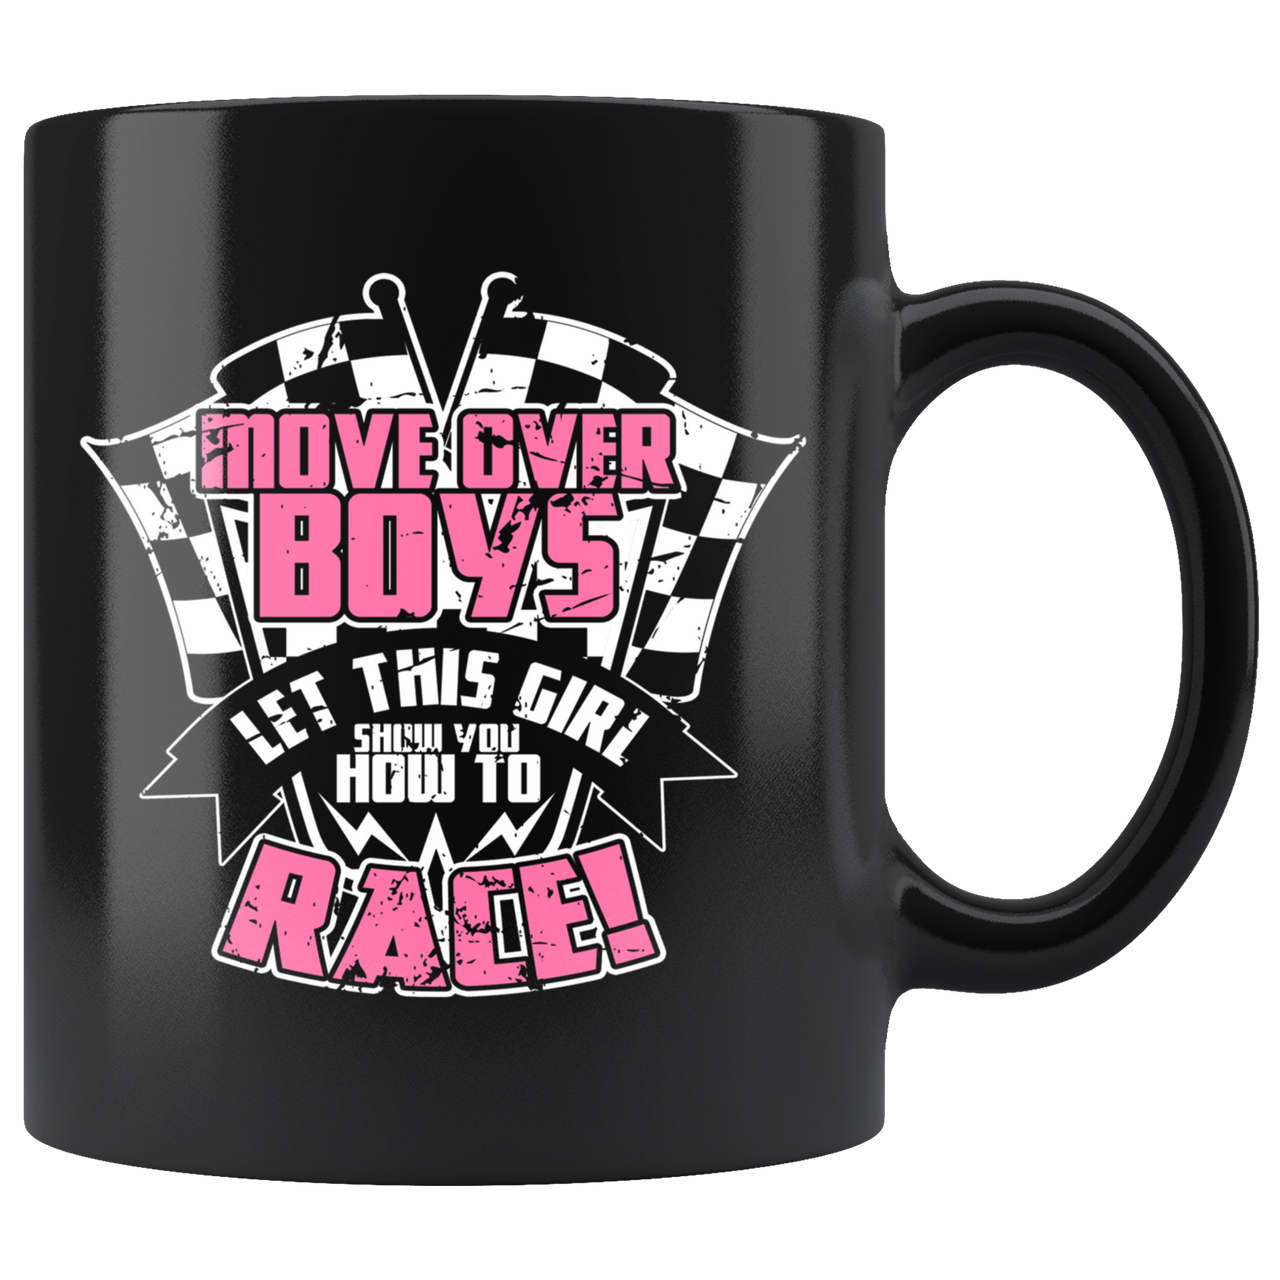 Move Over Boys Let this Girl Show You How To Race Mug!